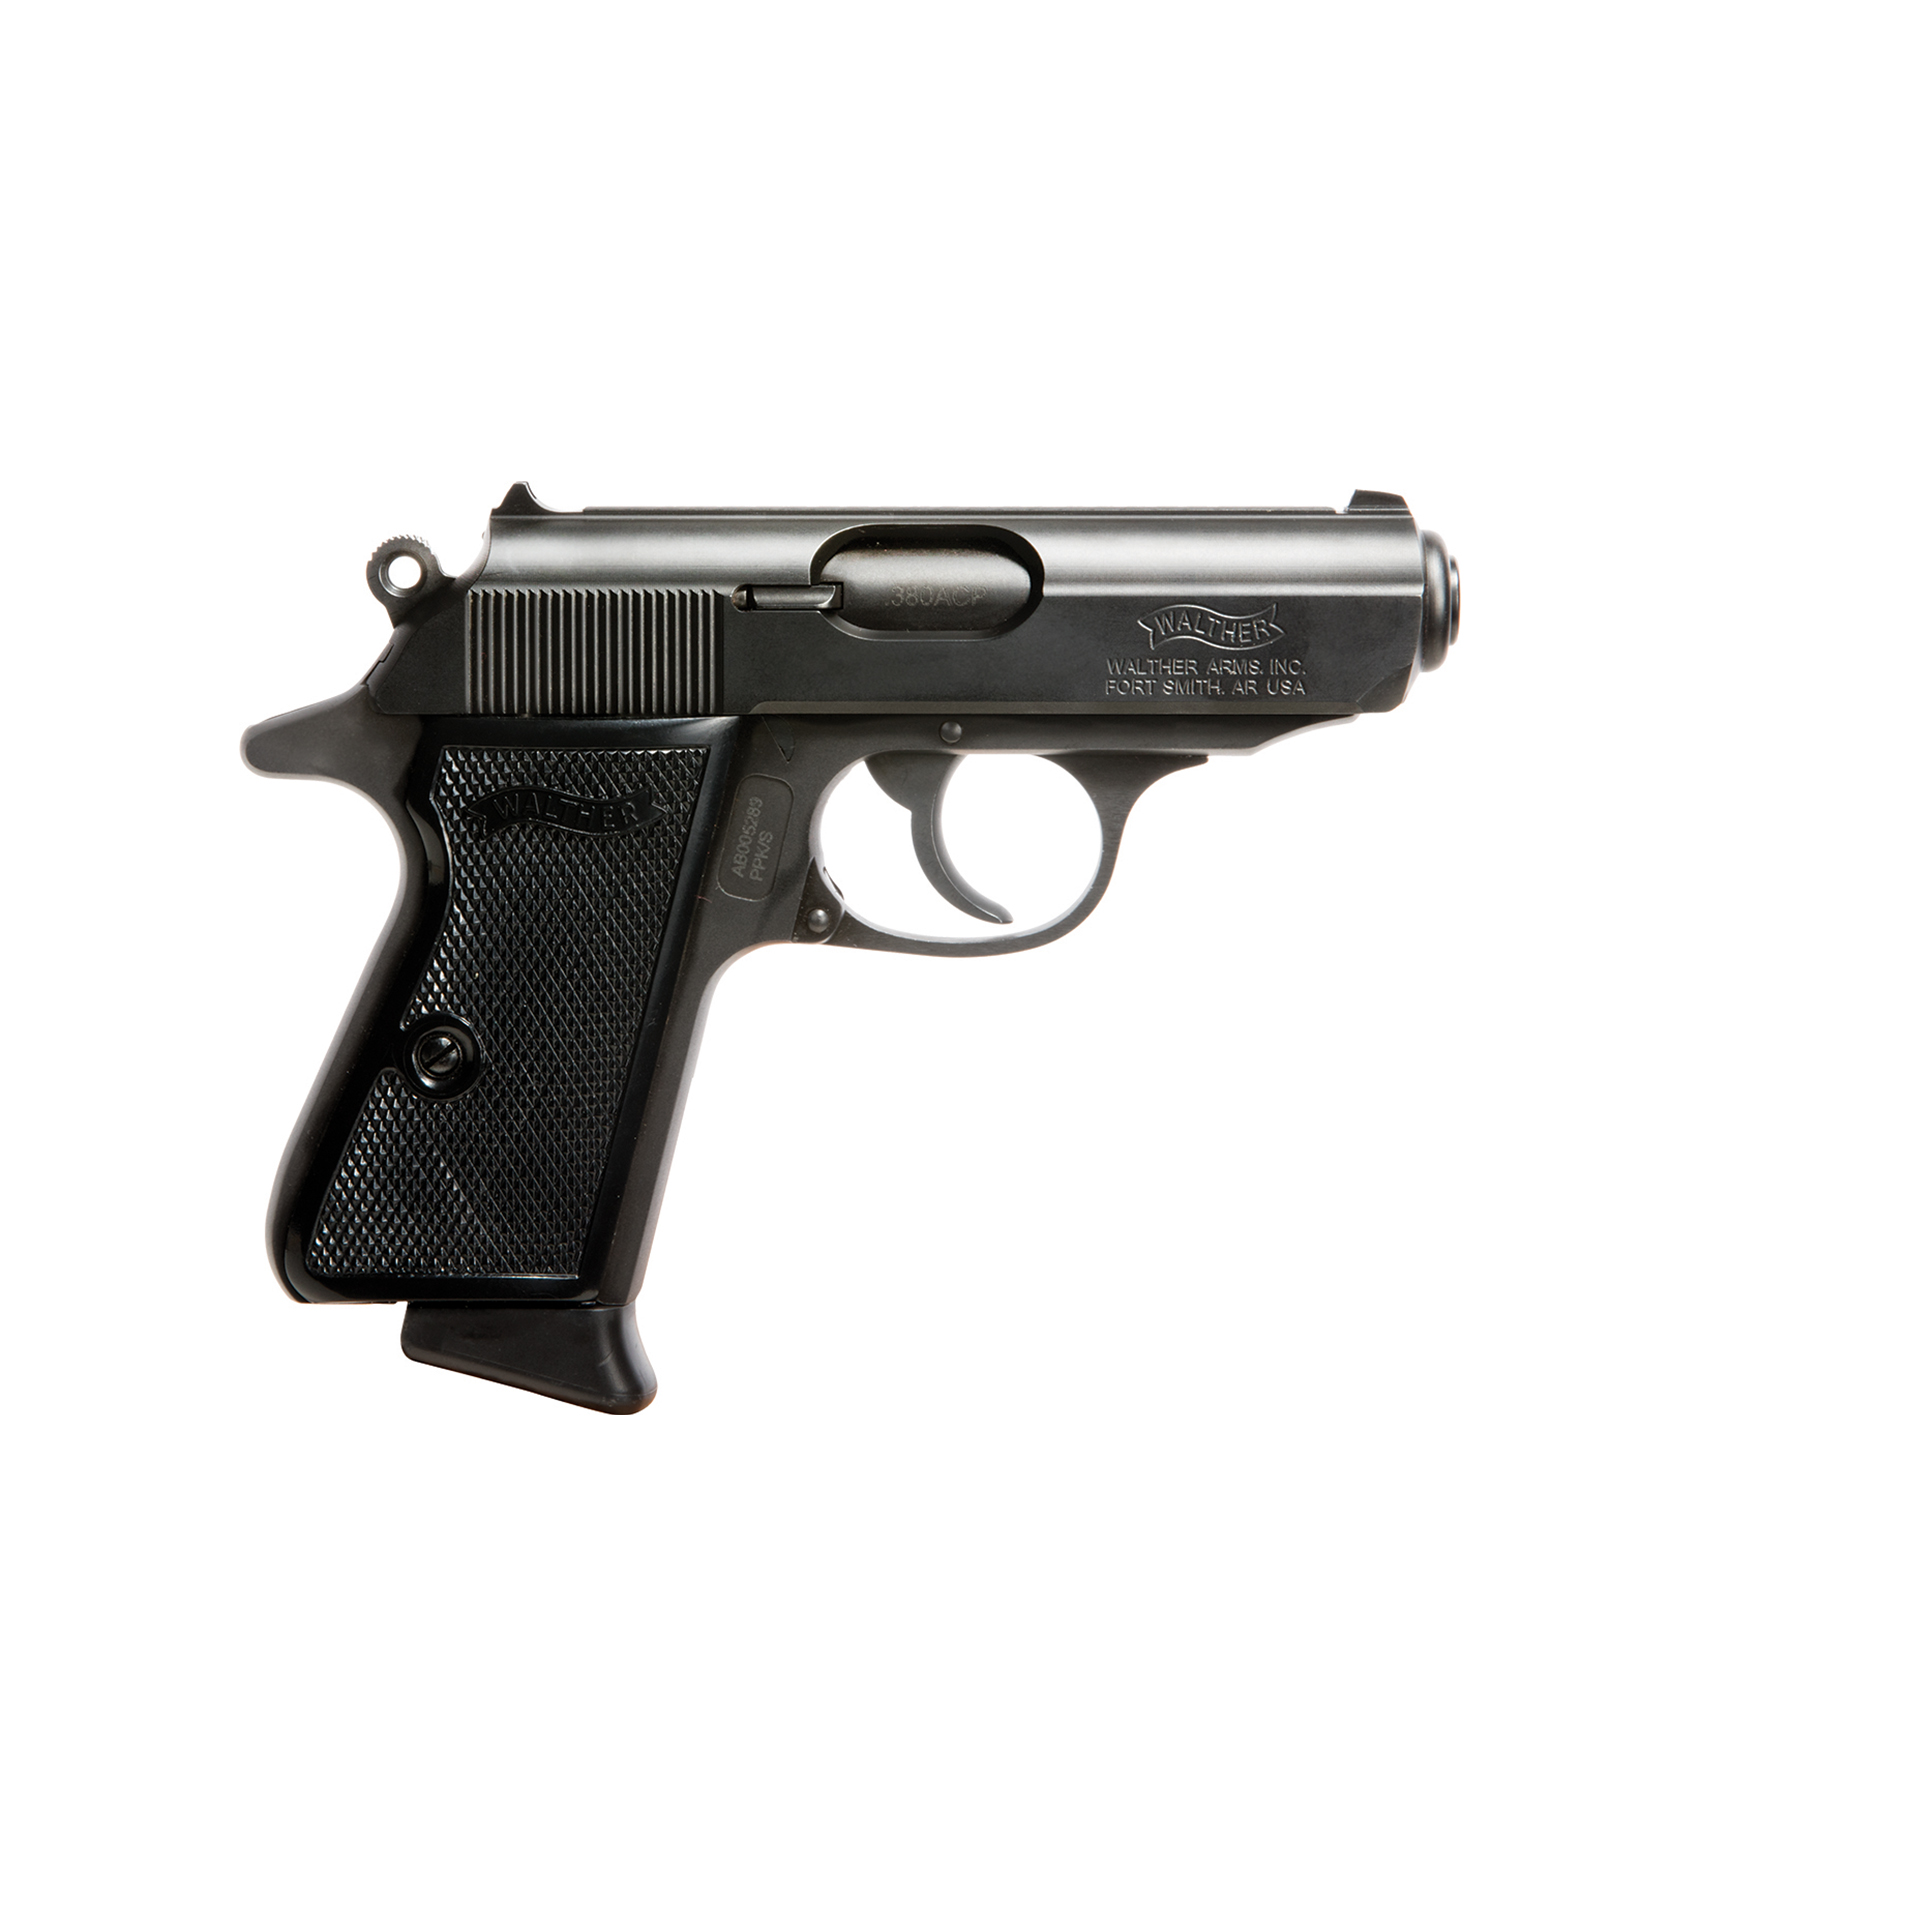 Walther PPK for sale Canada